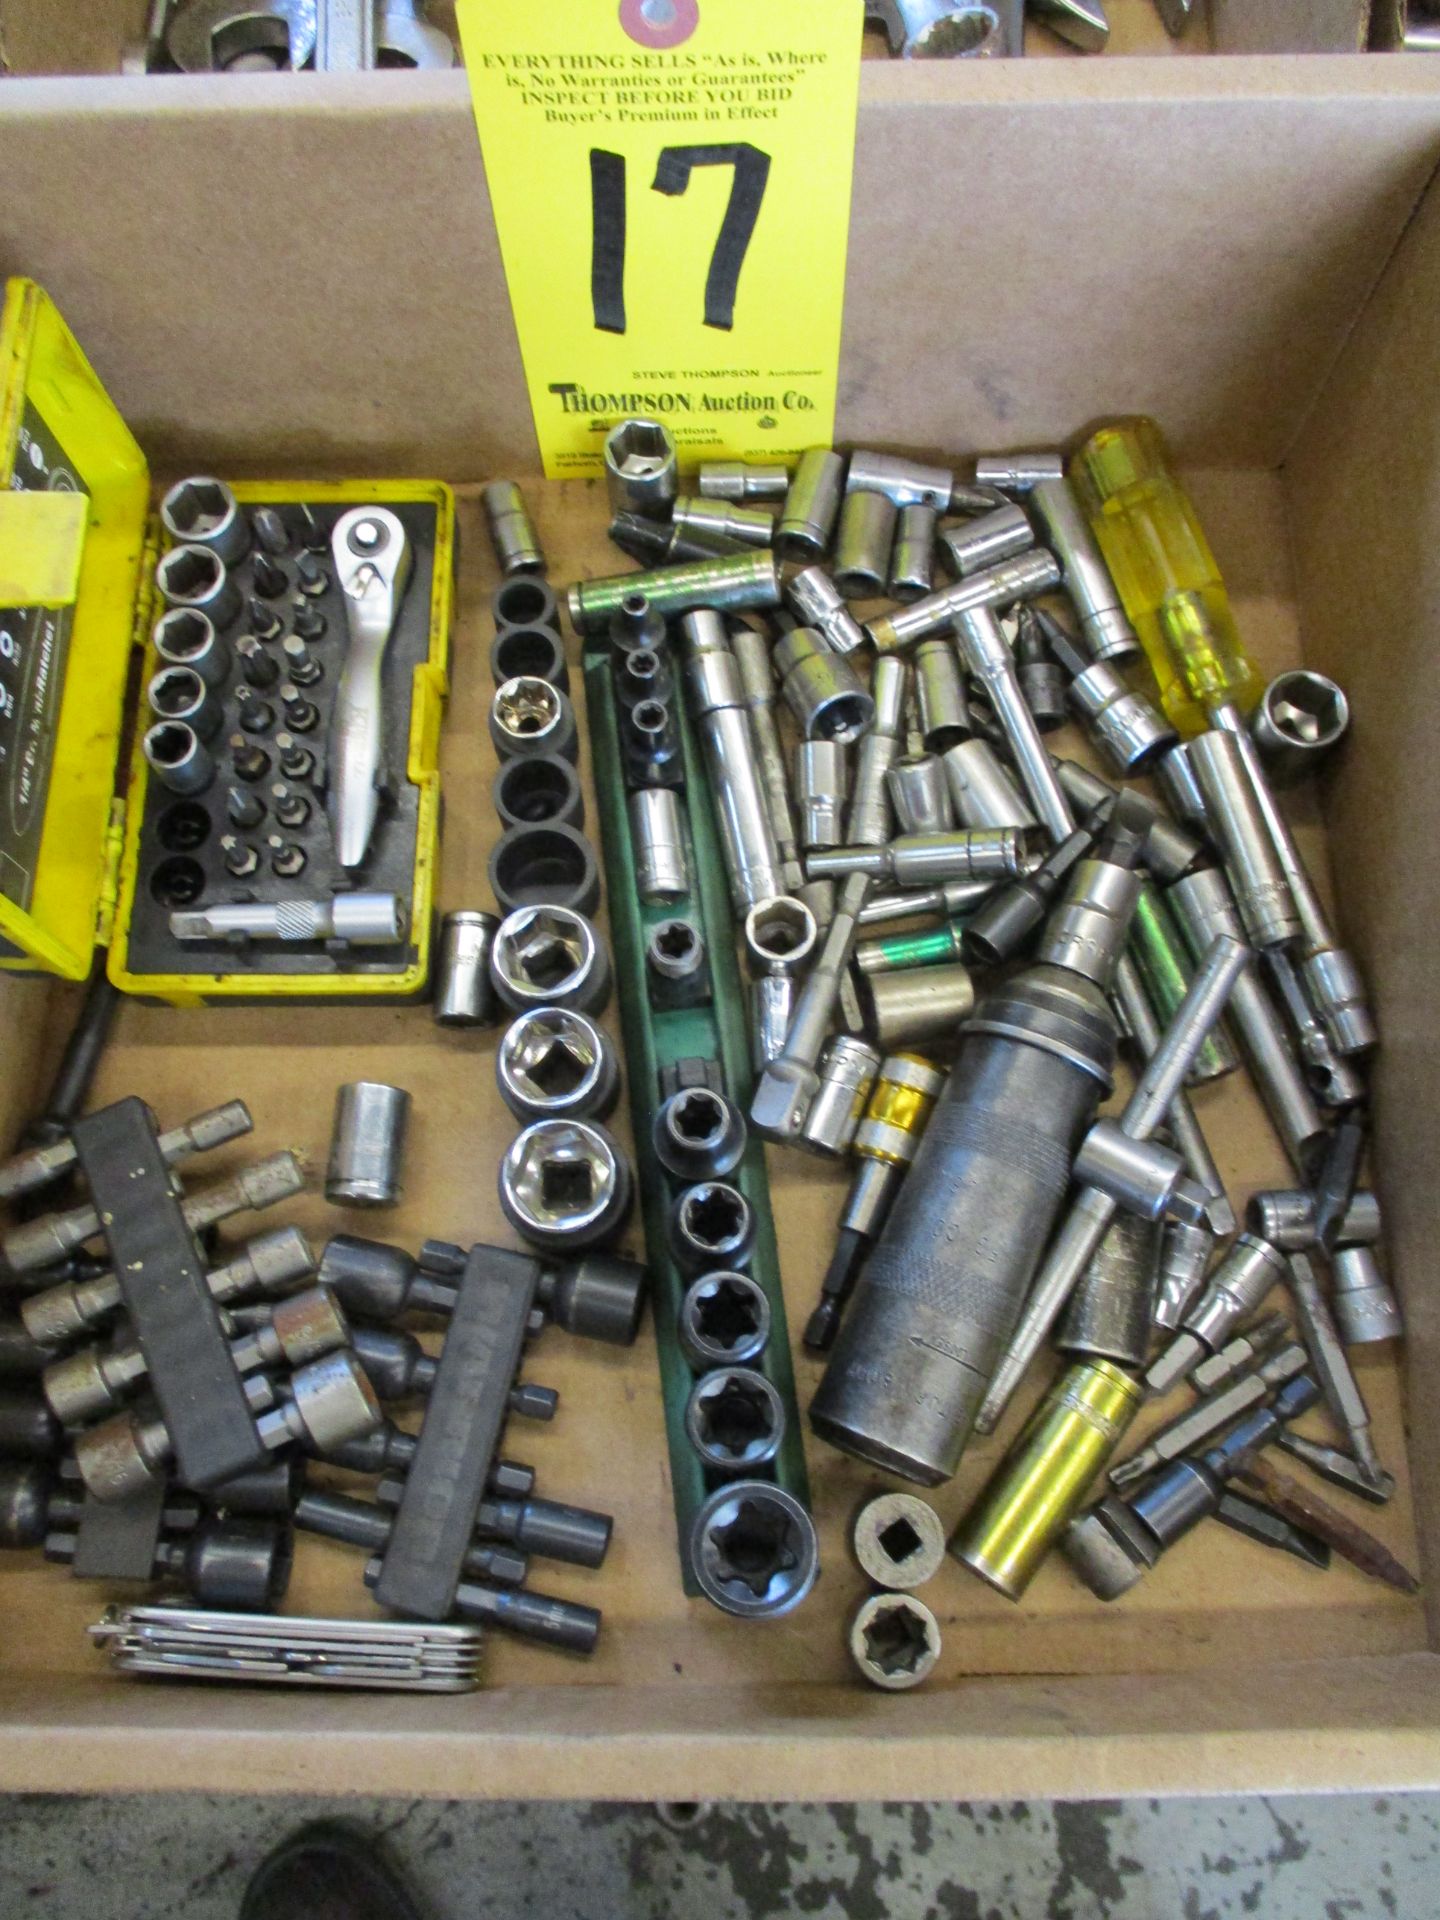 Miscellaneous Driver Tools